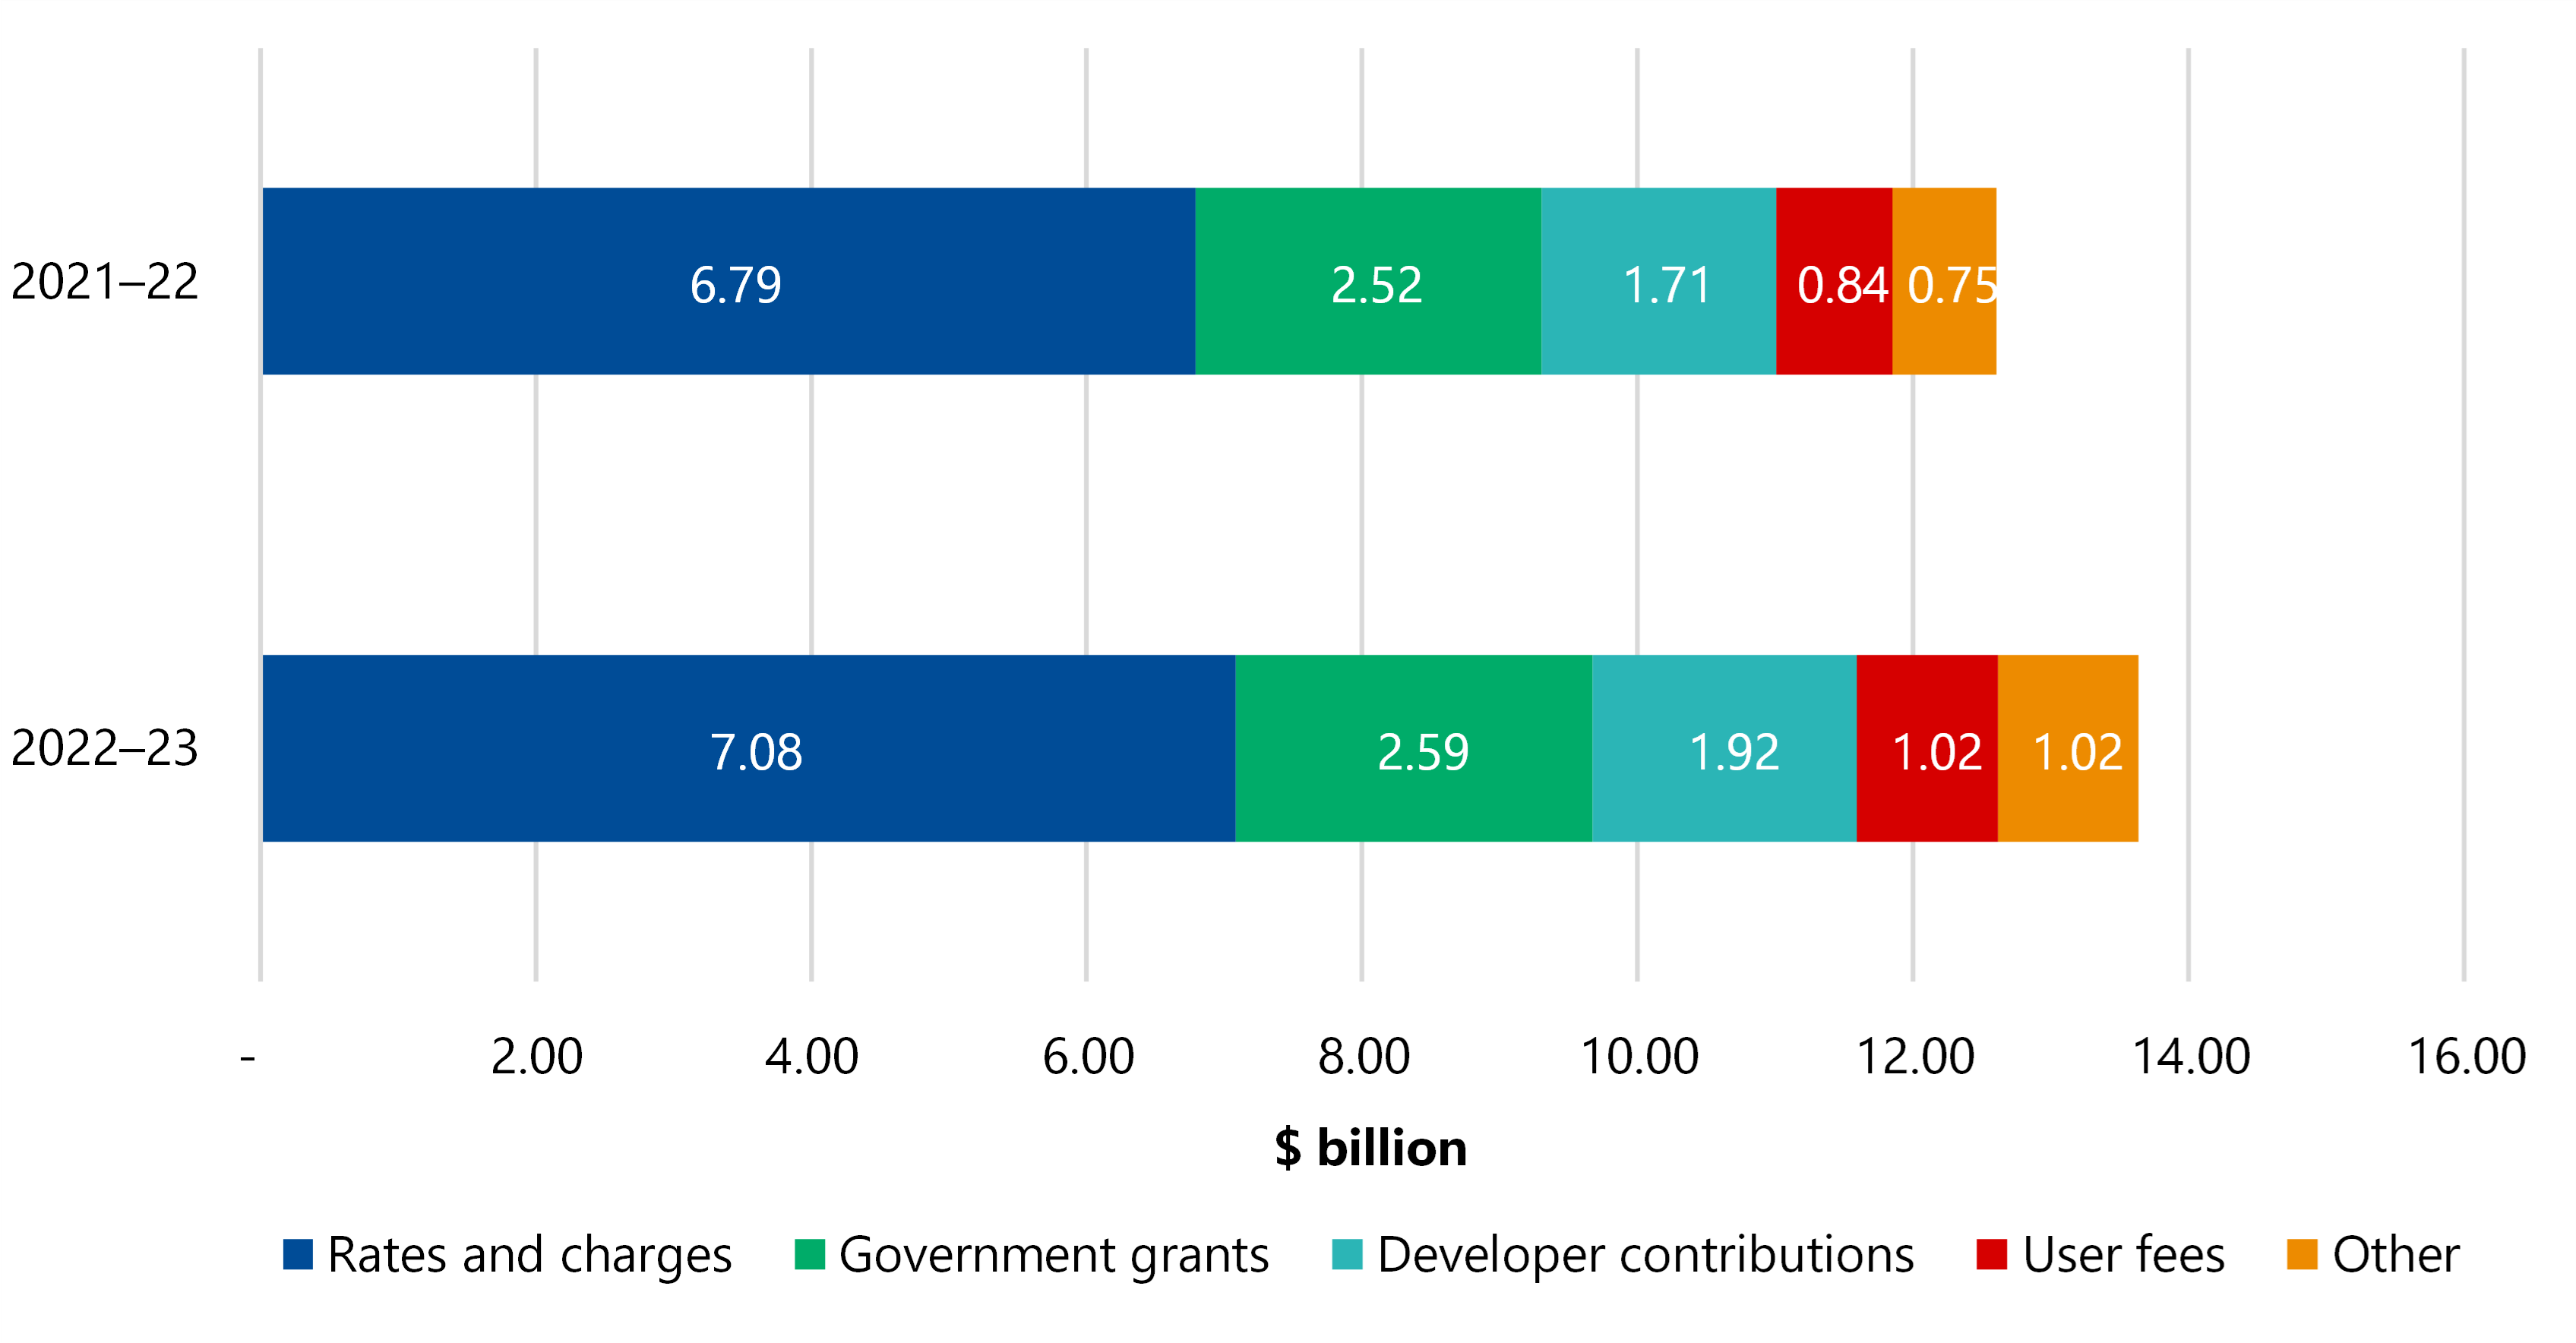 Figure 6 is a stacked bar chart showing that, for 2021–22, councils' revenues were made up of $6.79 billion from rates and charges, $2.52 billion from government grants, $1.71 billion from developer contributions, $0.84 billion from user fees and $0.75 billion from other sources. In 2022–23, revenues across all categories increased, to $7.08 billion from rates and charges, $2.59 billion from government grants, $1.92 billion from developer contributions, $1.02 billion from user fees and $1.02 billion from other sources.